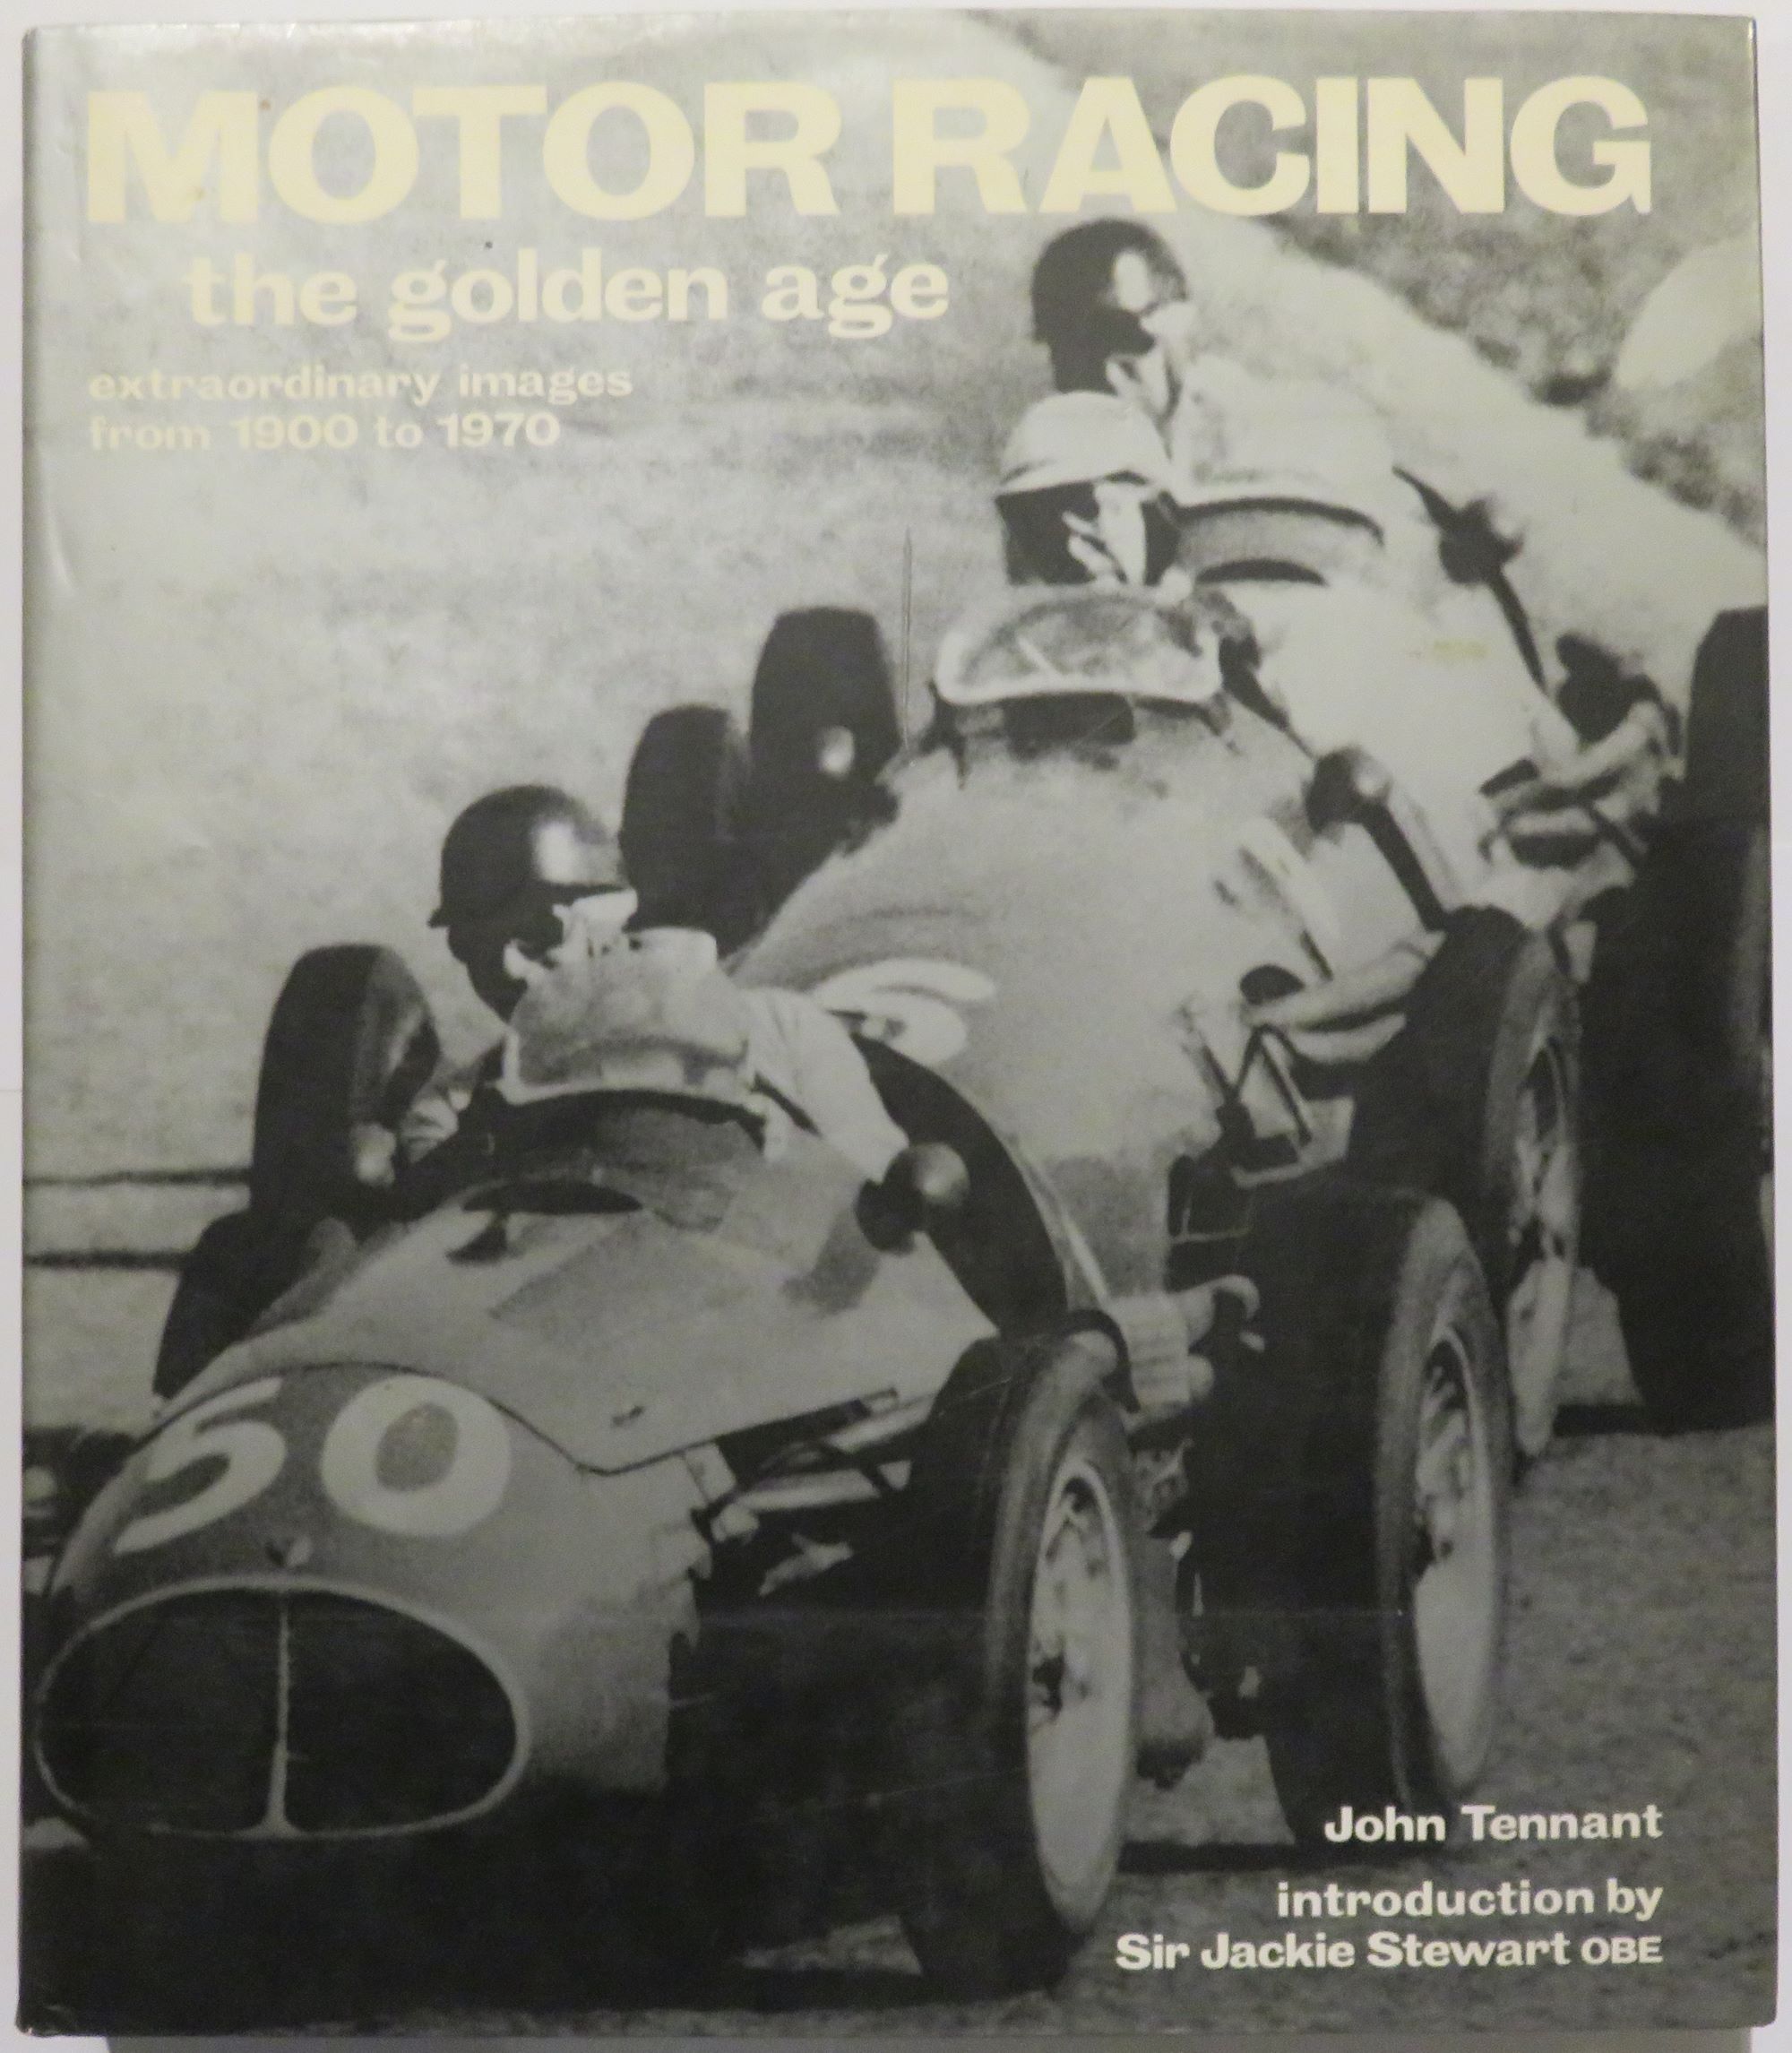 Motor Racing: The Golden Age